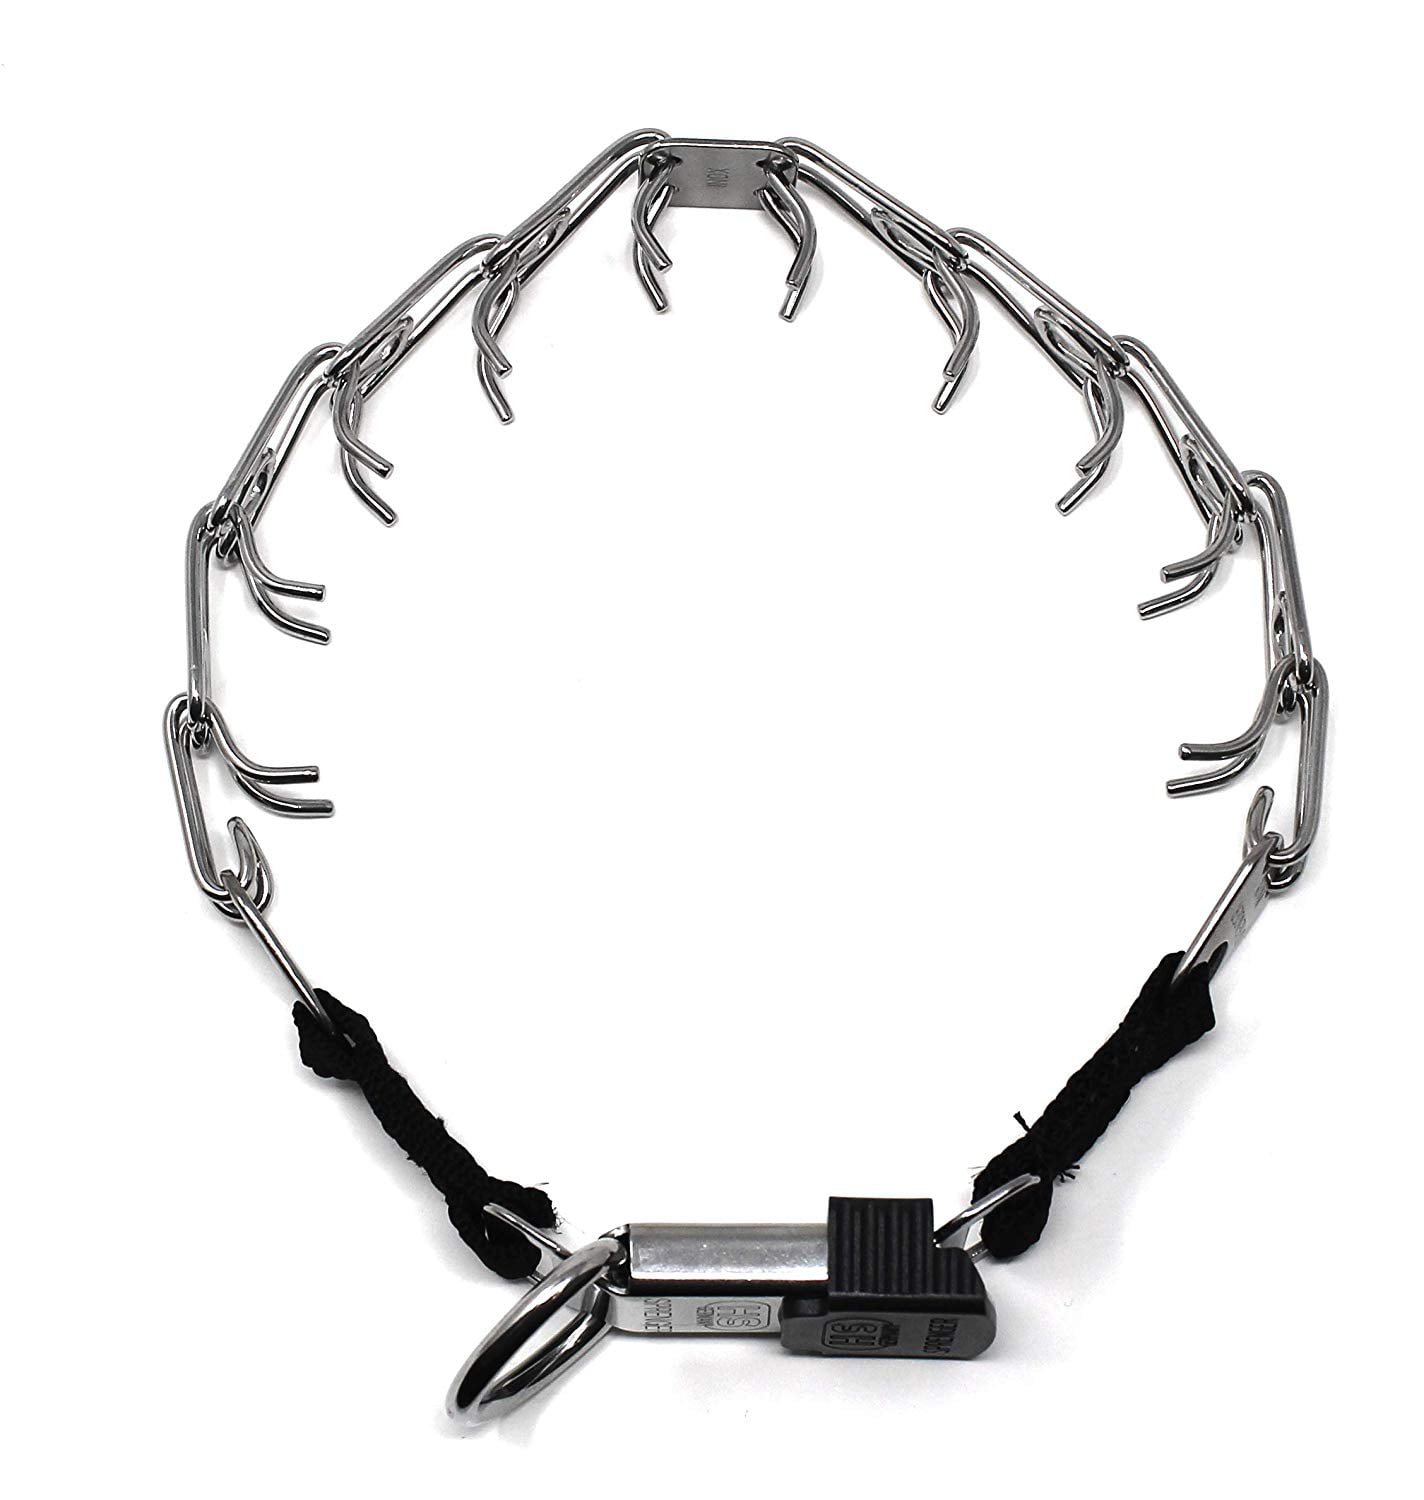 Herm Sprenger Prong Collar with 2 O-rings for Dog Training and Dog Walking 